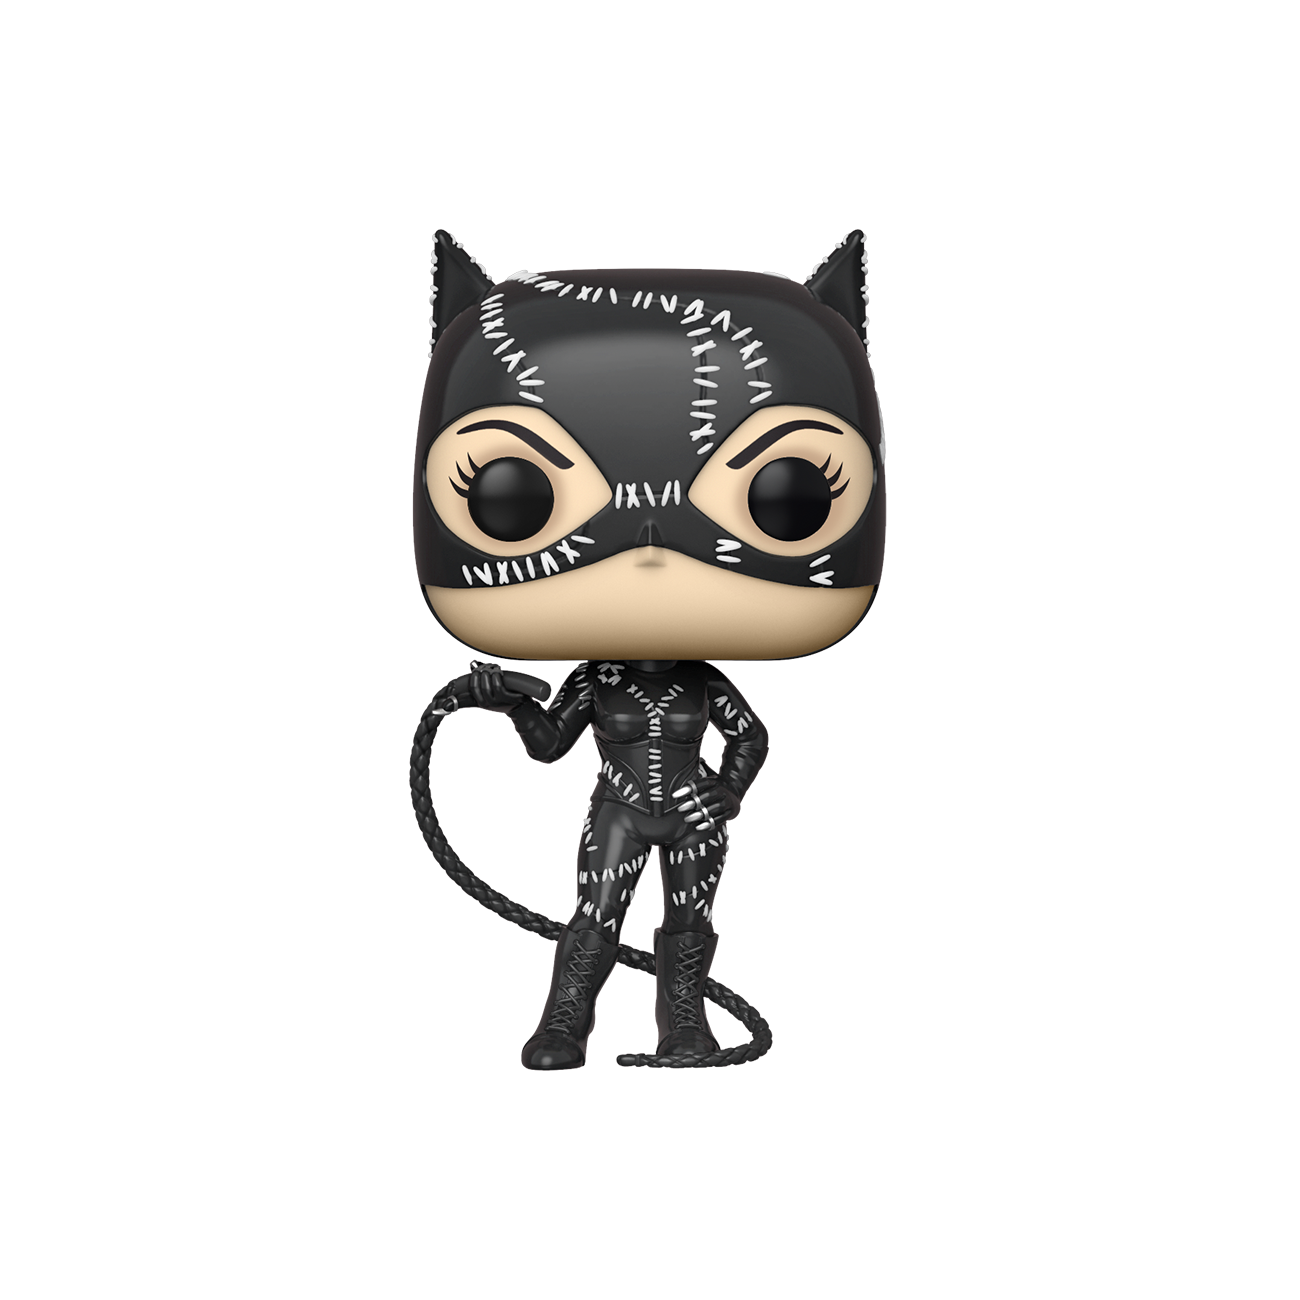 Fornite Catwoman Zero PNG HD Quality